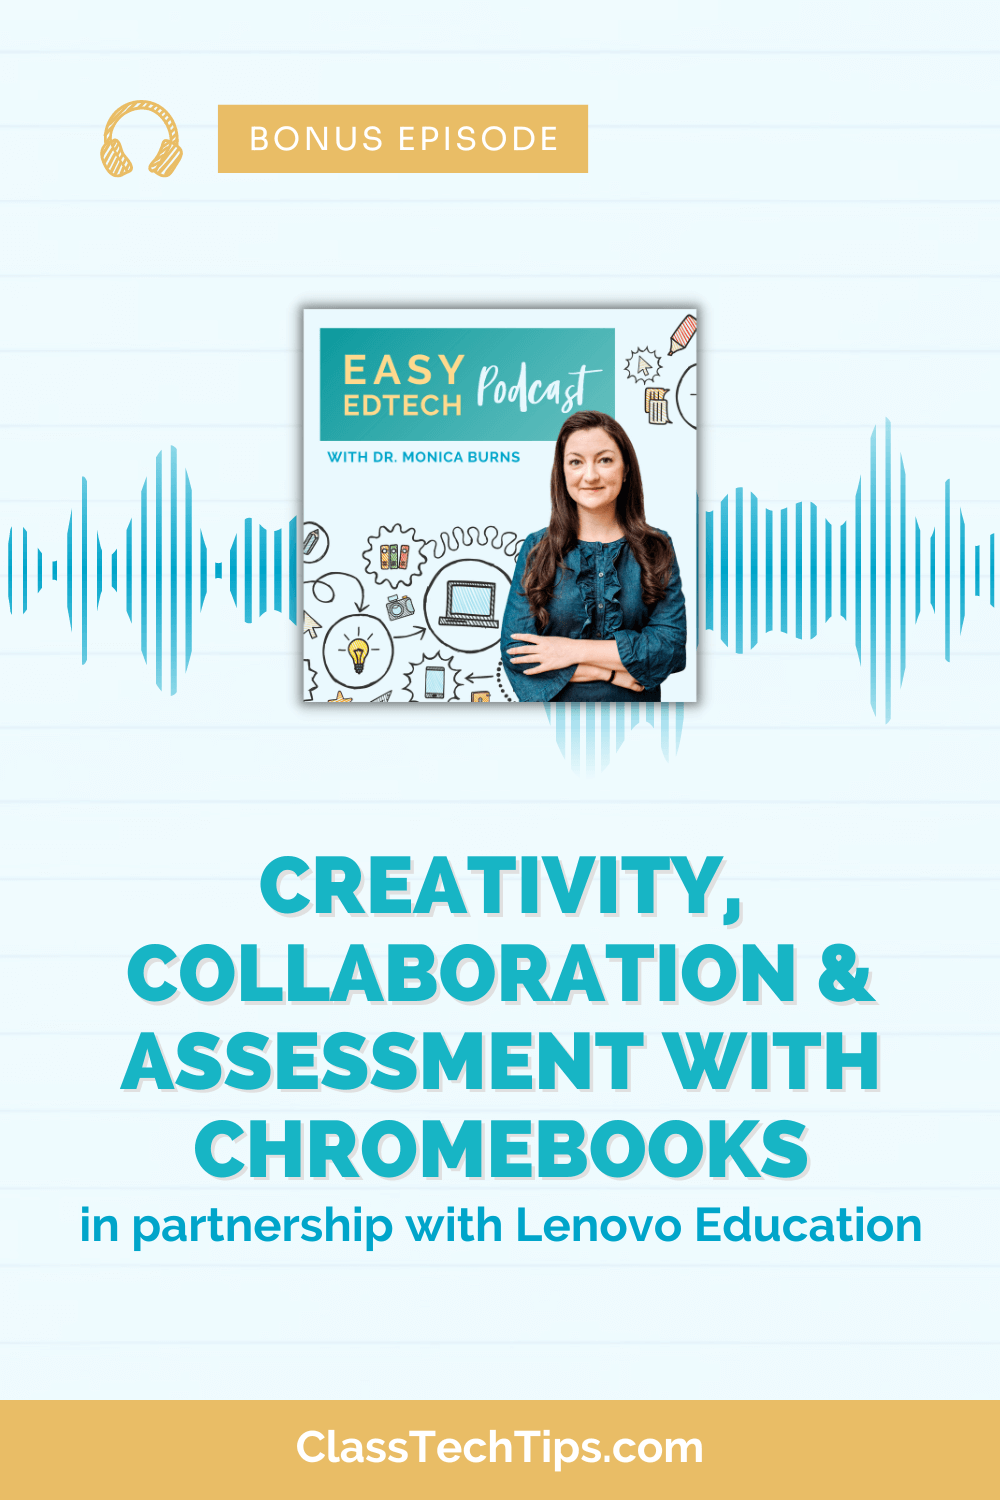 Episode artwork featuring the podcast logo, a Chromebook, and text highlighting the discussion with Lenovo Education on enhancing classroom creativity and collaboration.